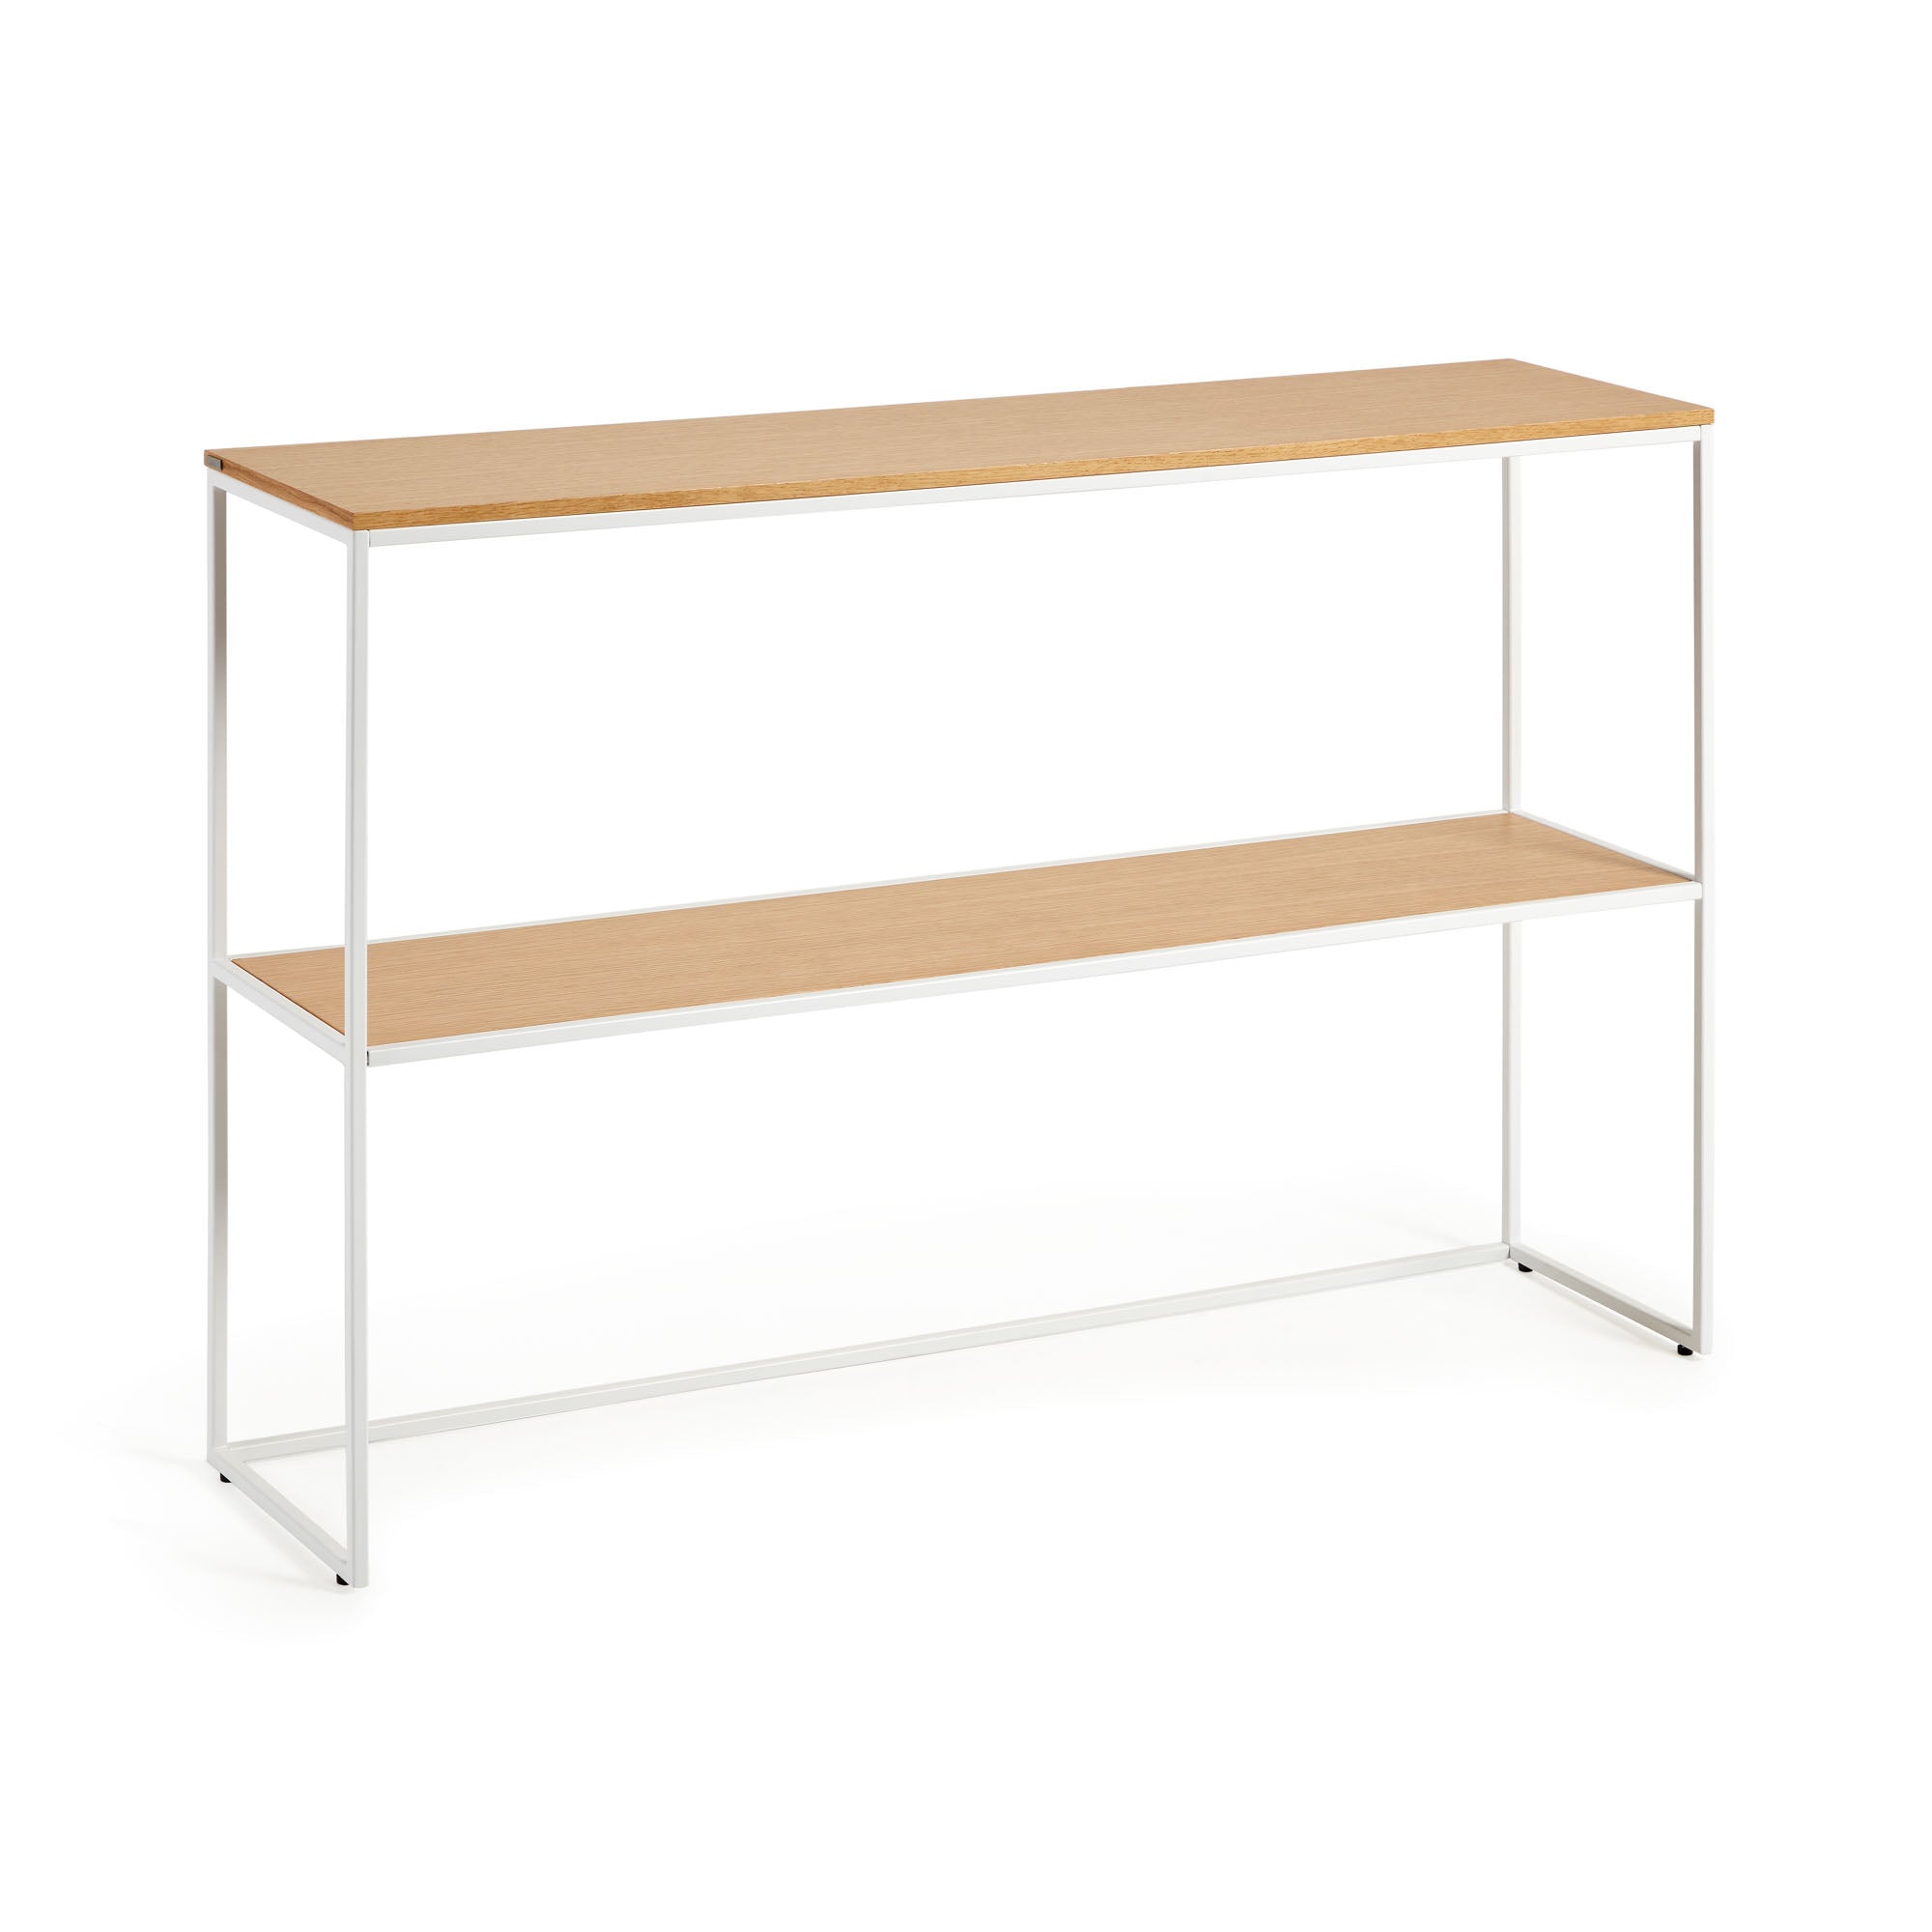 Yoana console table with oak veneer and painted white metal structure, 120 x 80 cm